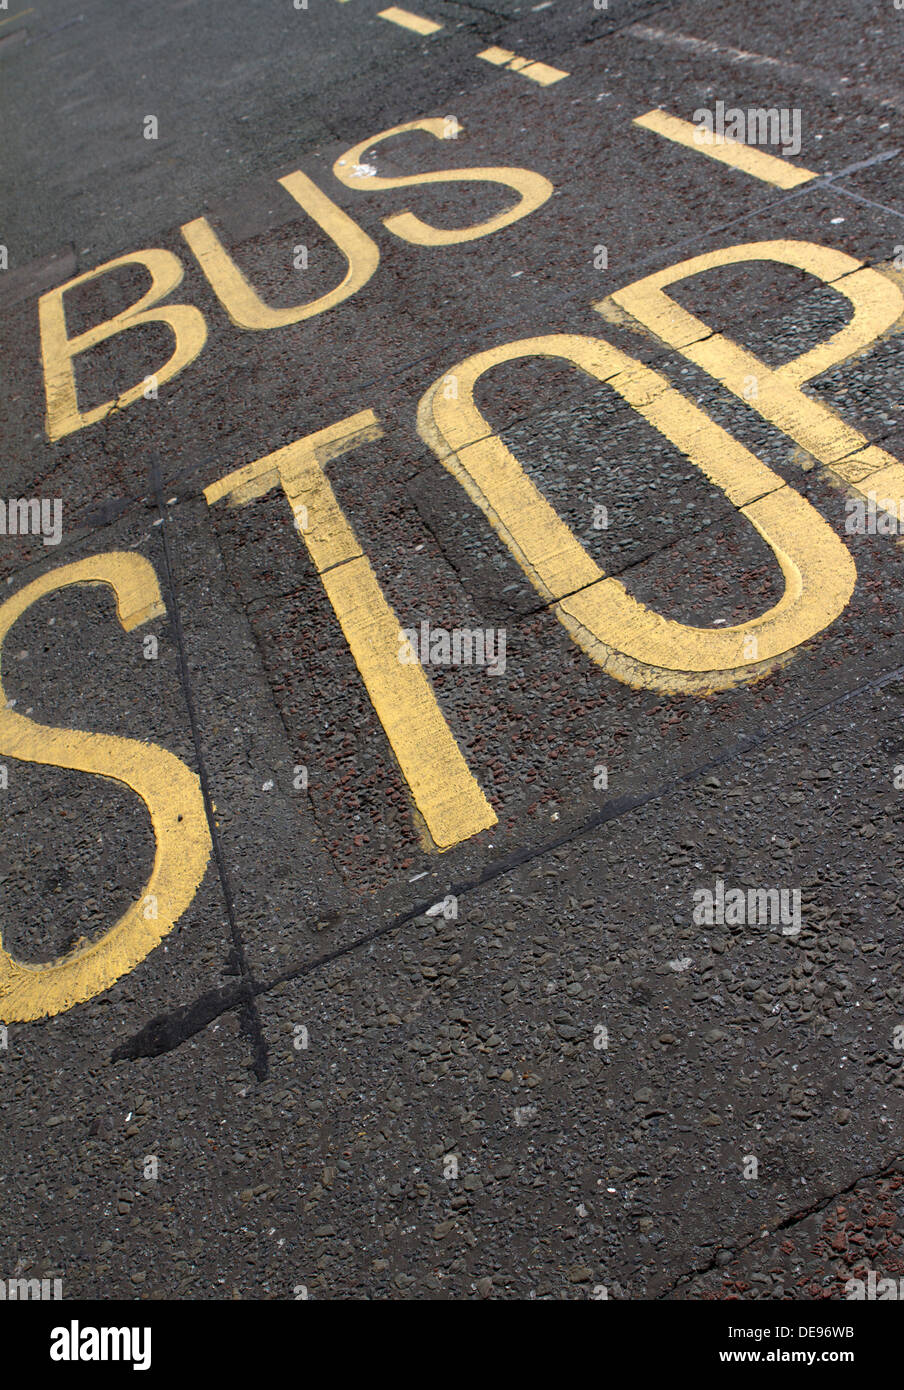 Bus stop road marking. Stock Photo